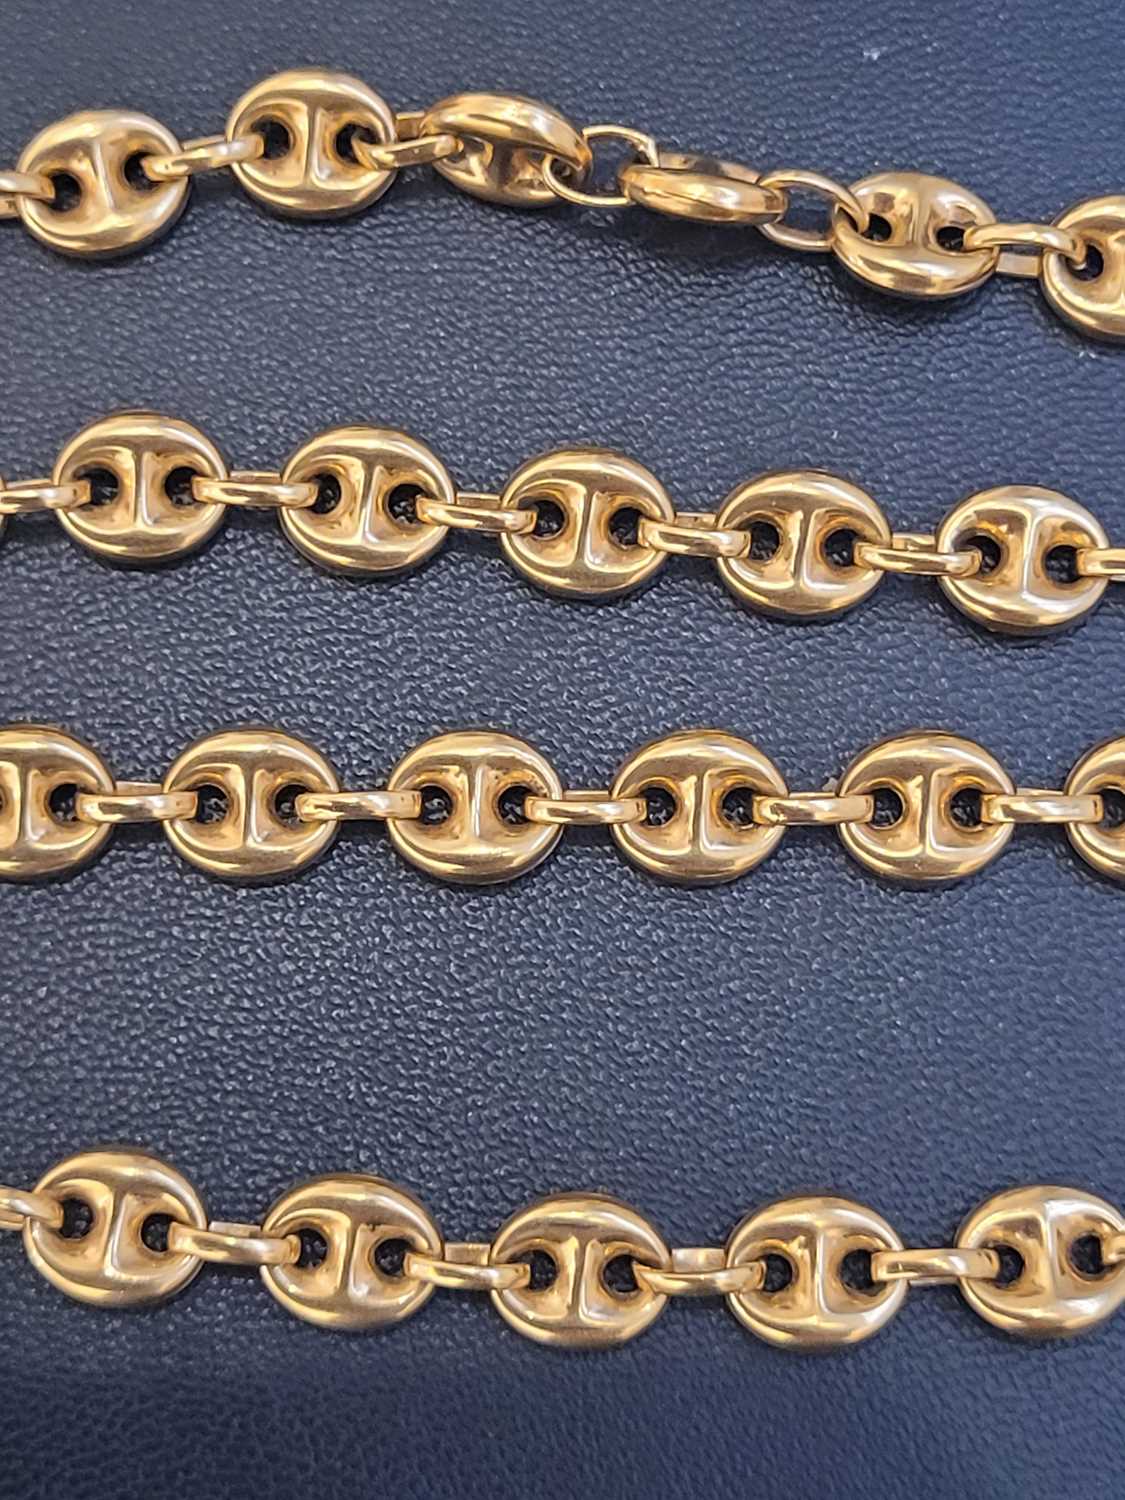 An 18ct gold anchor link chain by UnoAErre, - Image 2 of 3